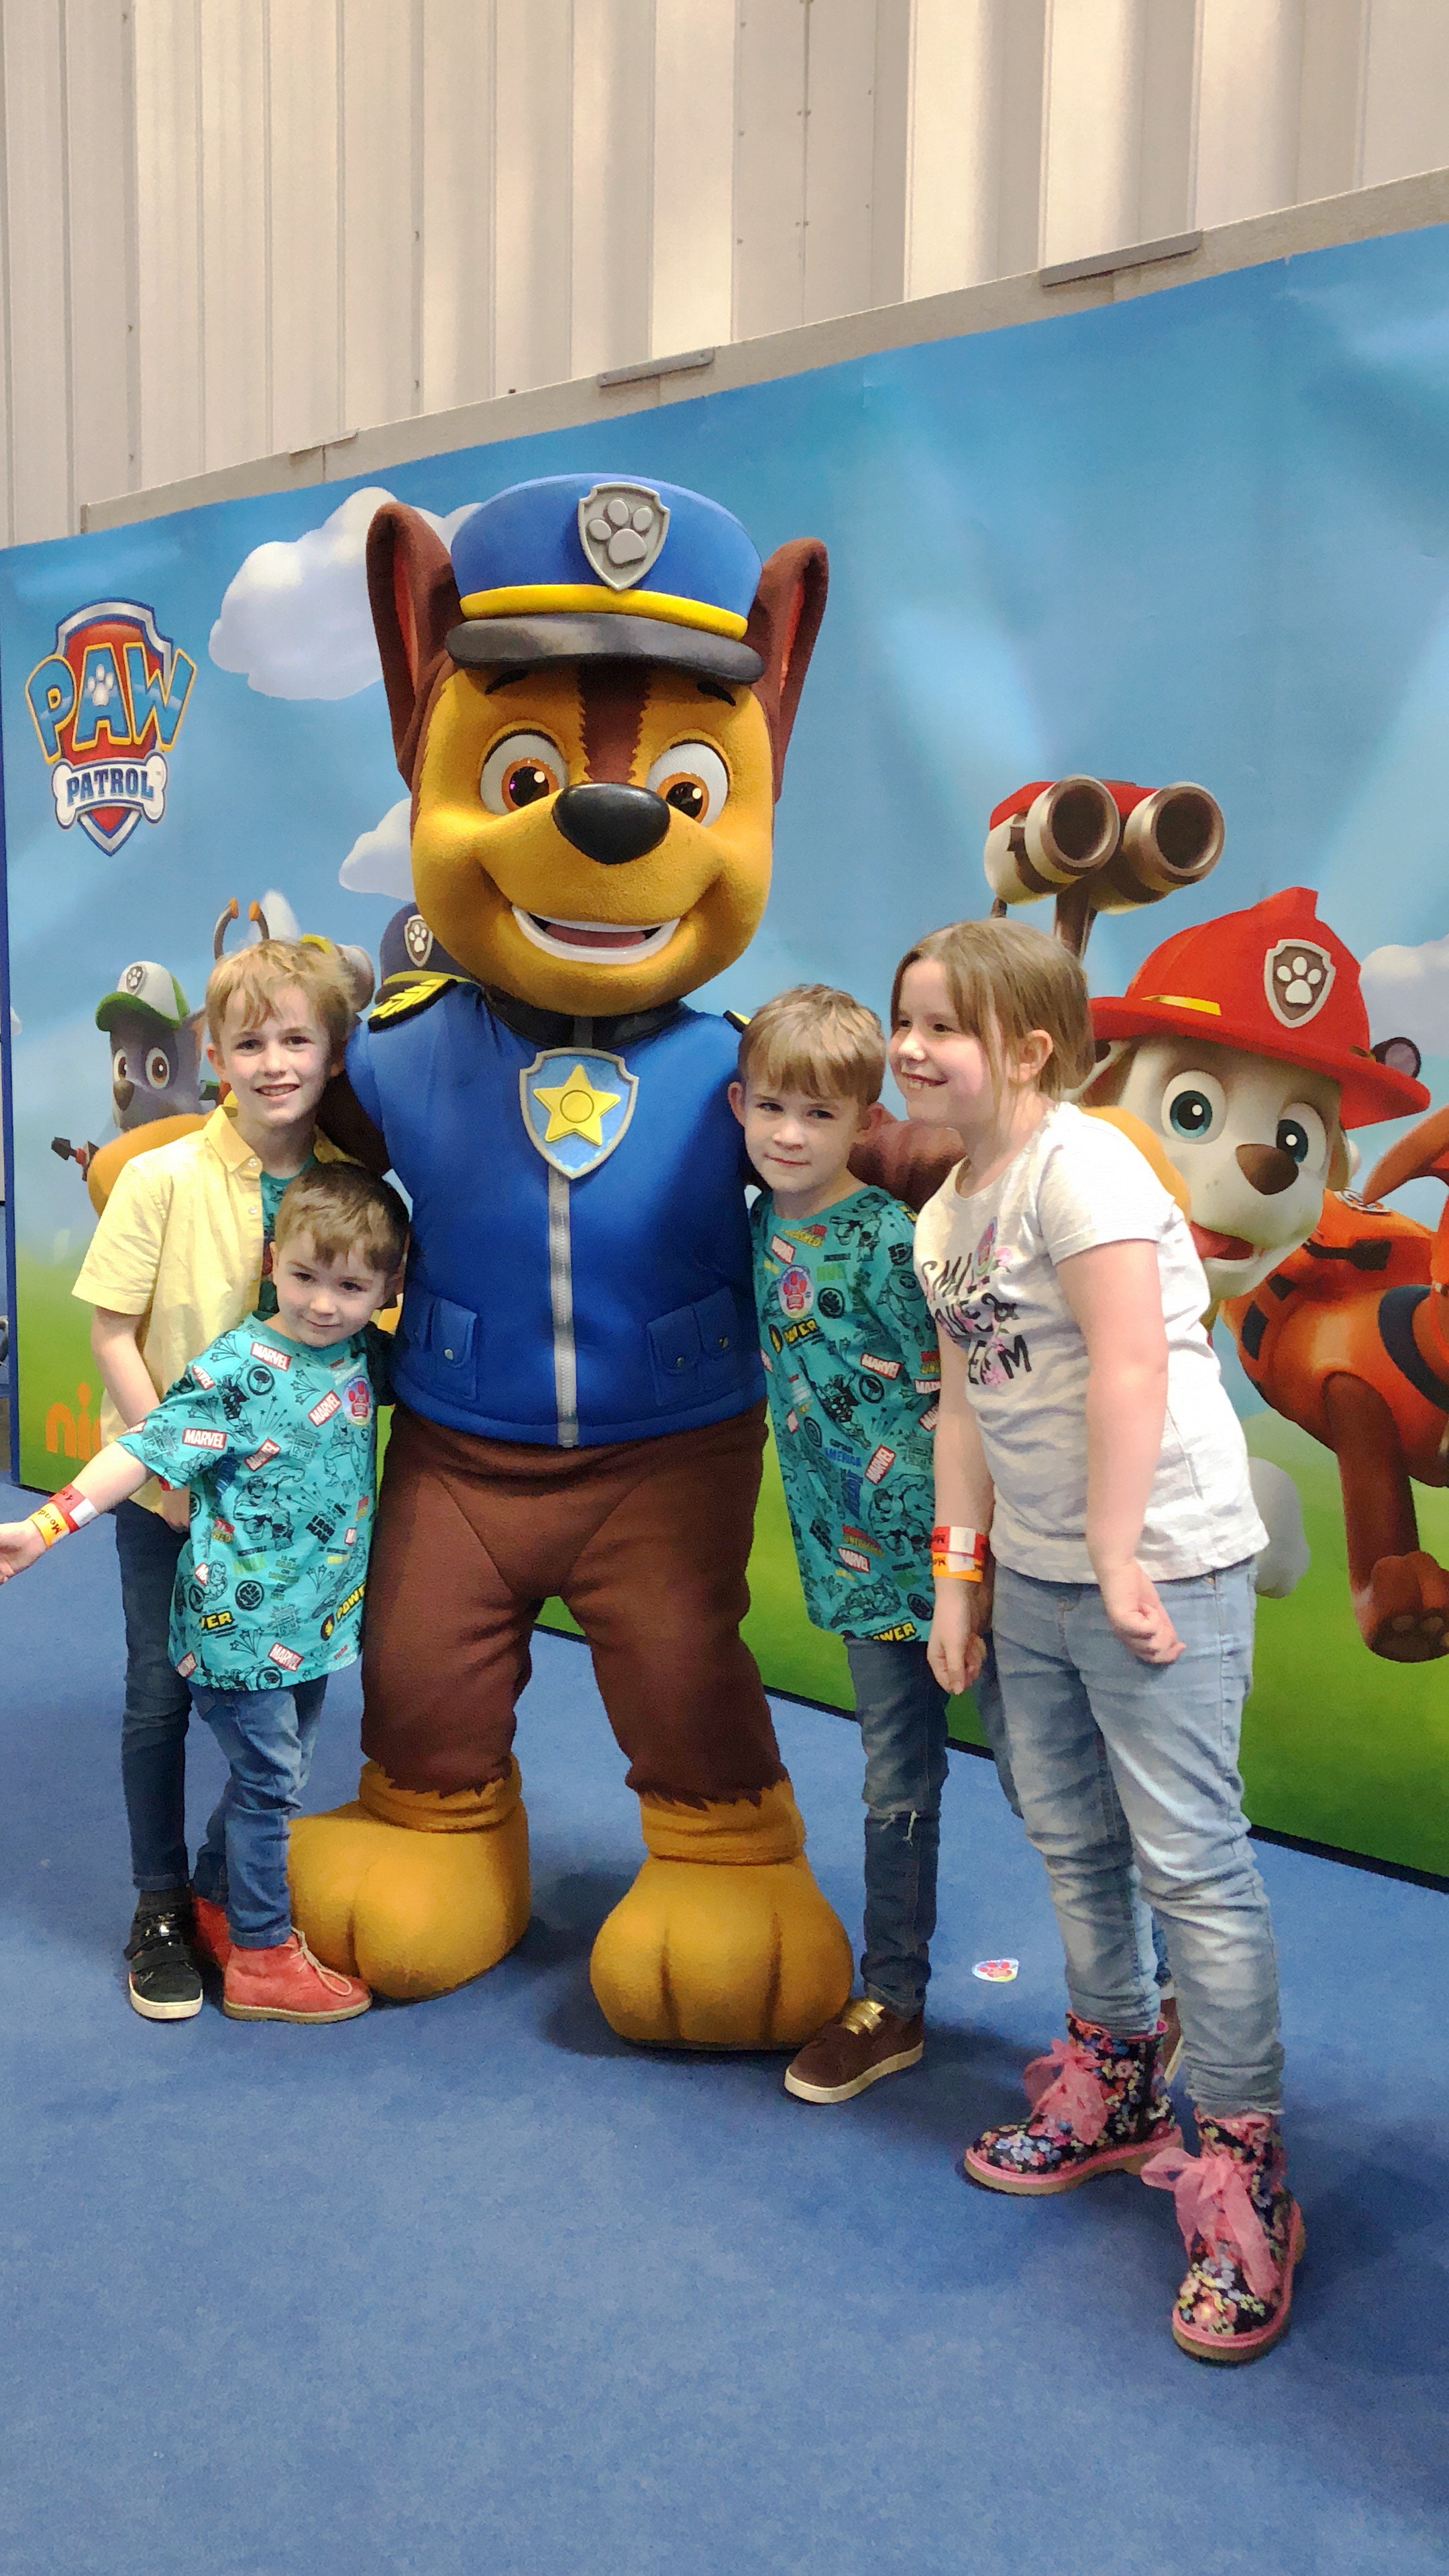 PAW PATROL LITTLE HEROES PAW AWARDS 2019